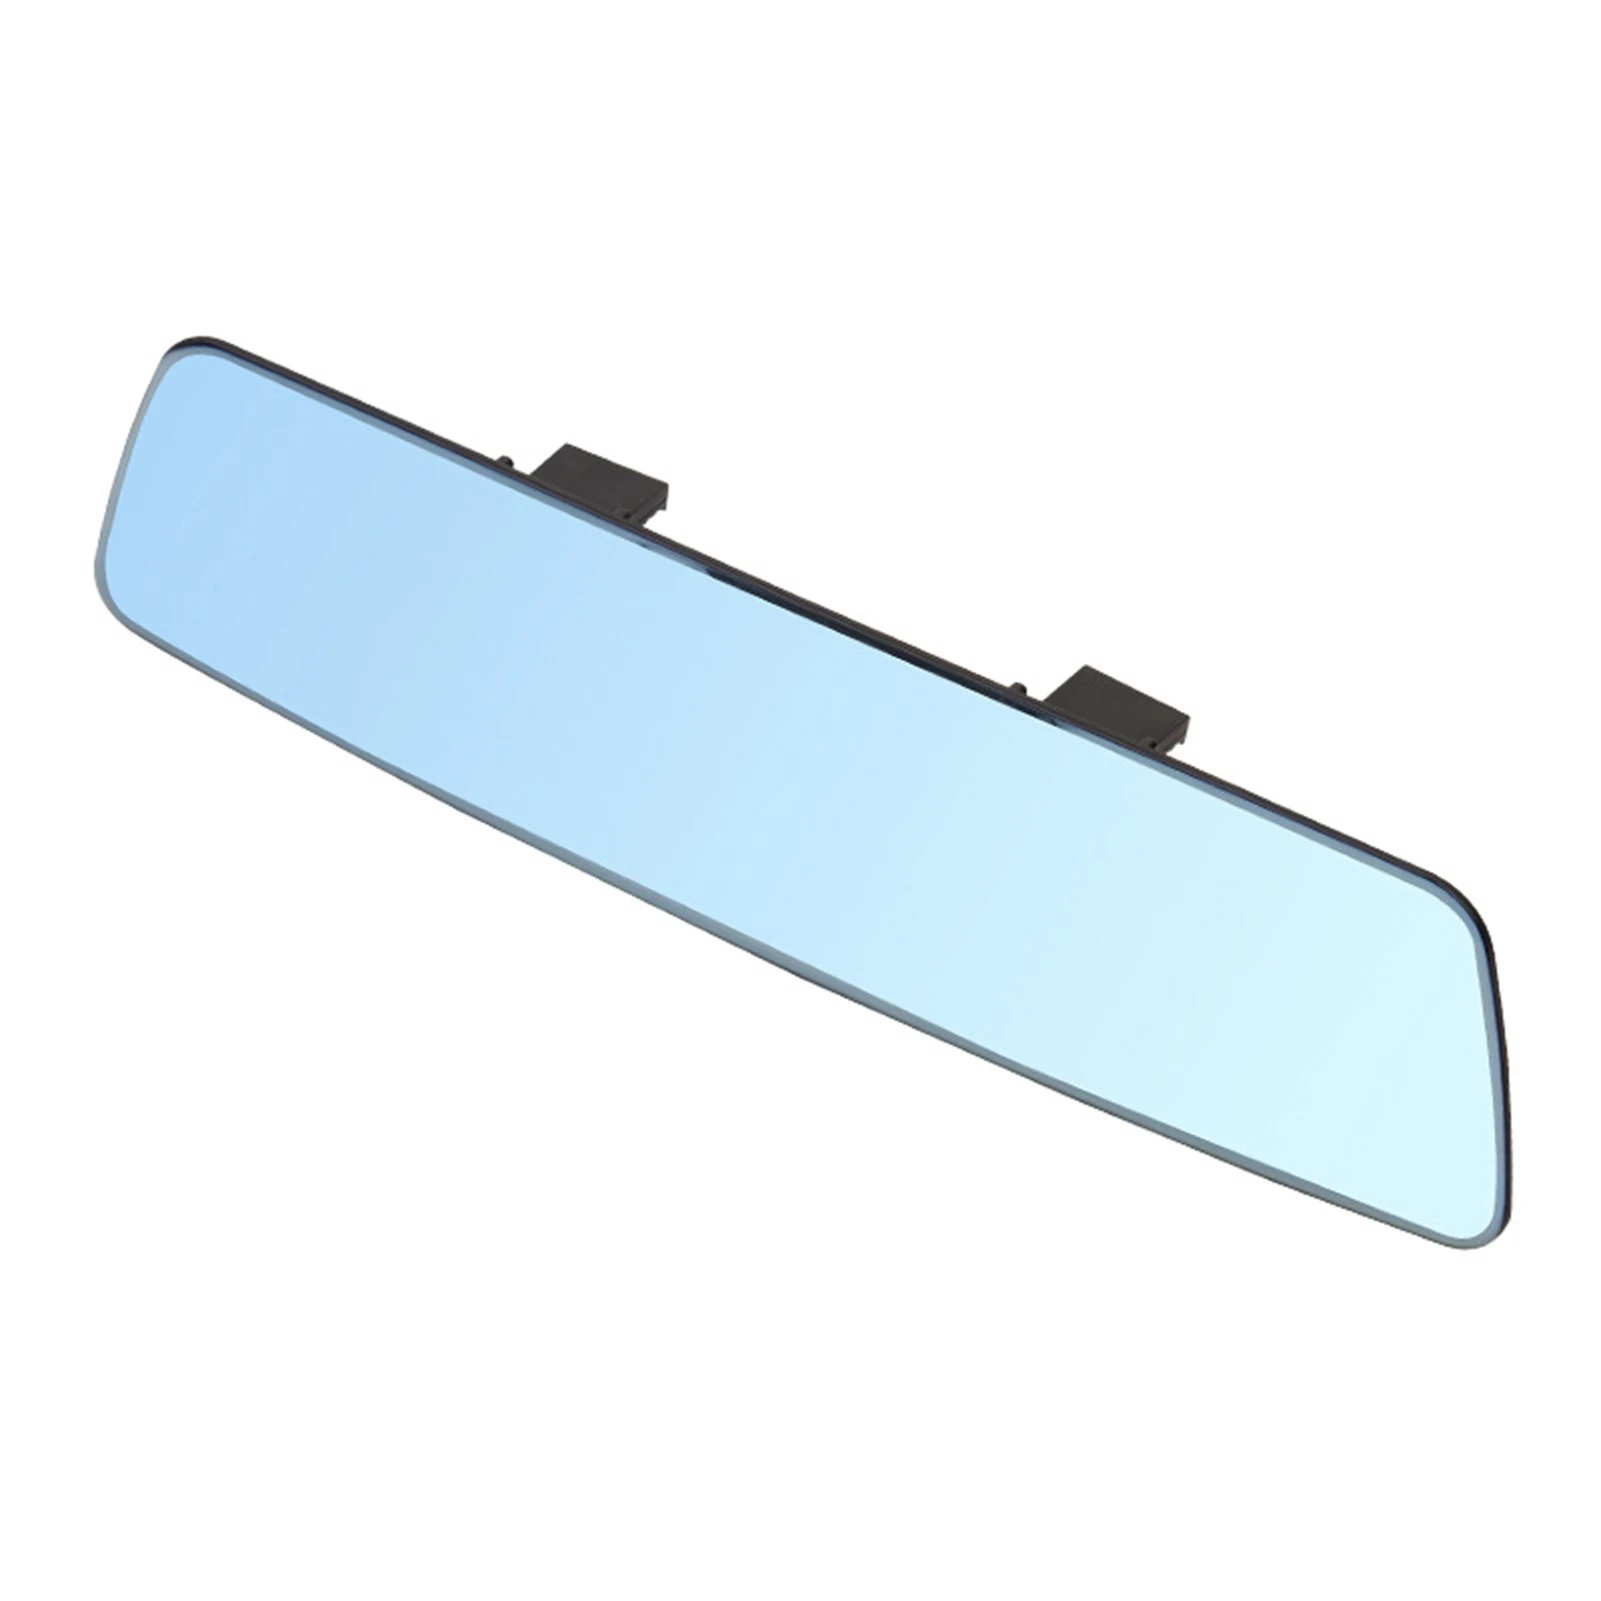 

Anti-Glare Rear View Mirror Clip-On Wide Angles Rear View Mirrors Reduce Blind Spot Effectively For Car SUV Trucks Gifts For